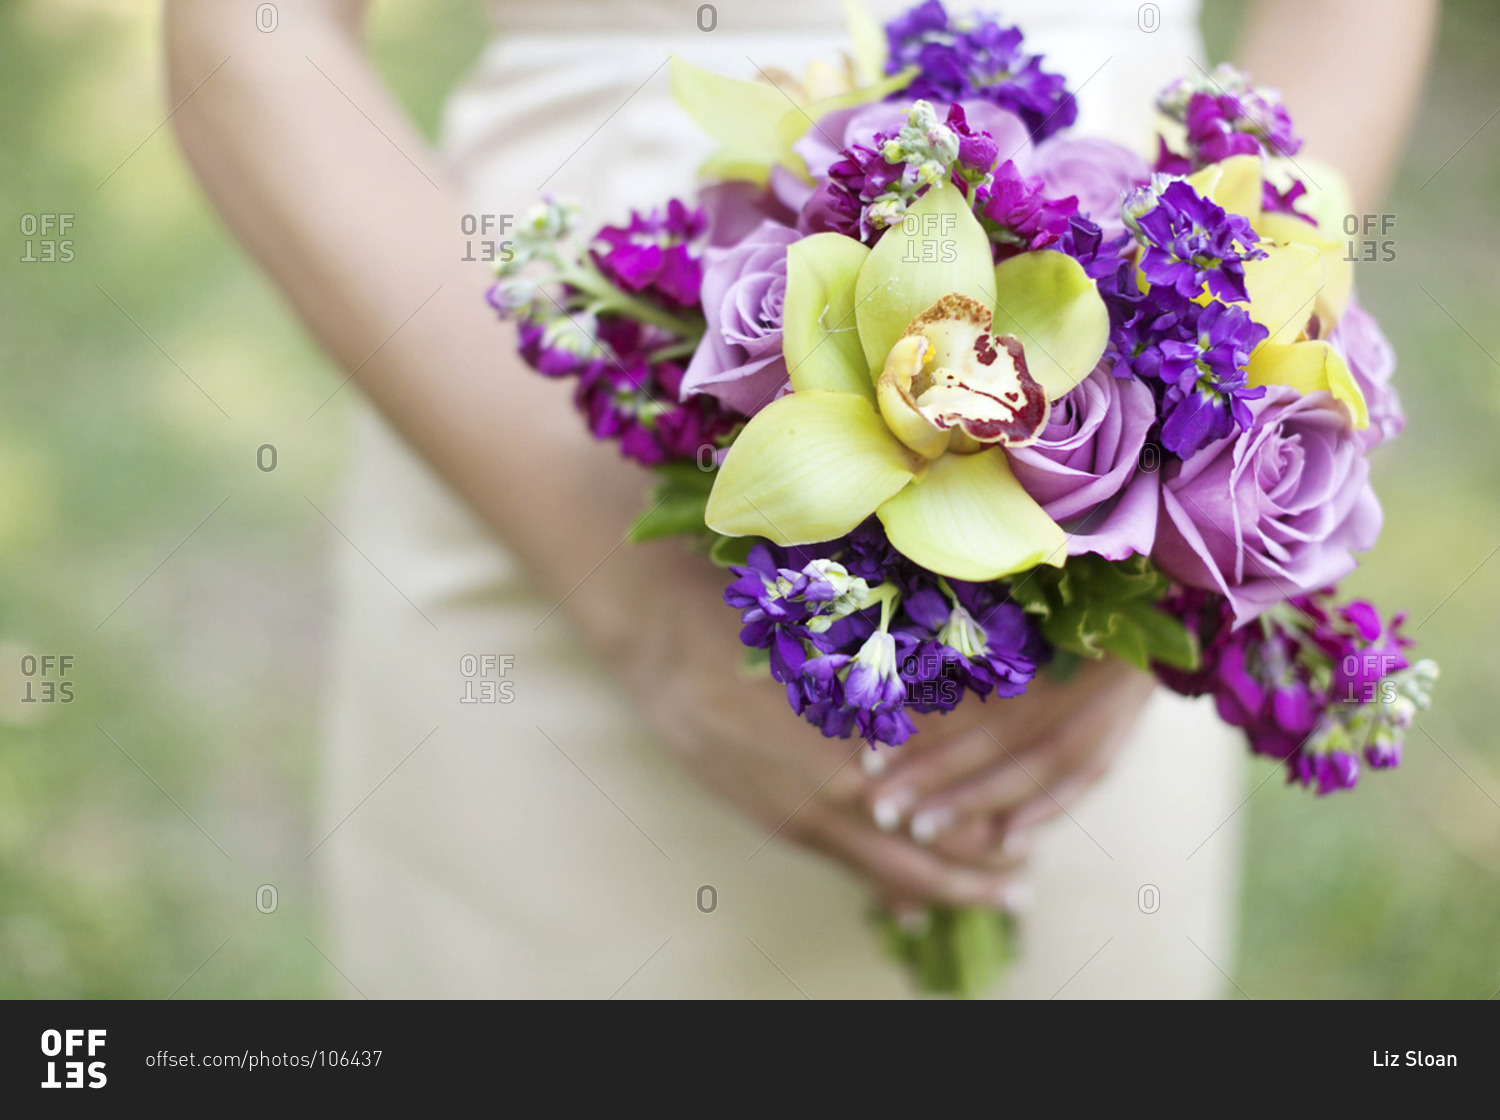 Mid section view of bride holding purple and green bridal bouquet